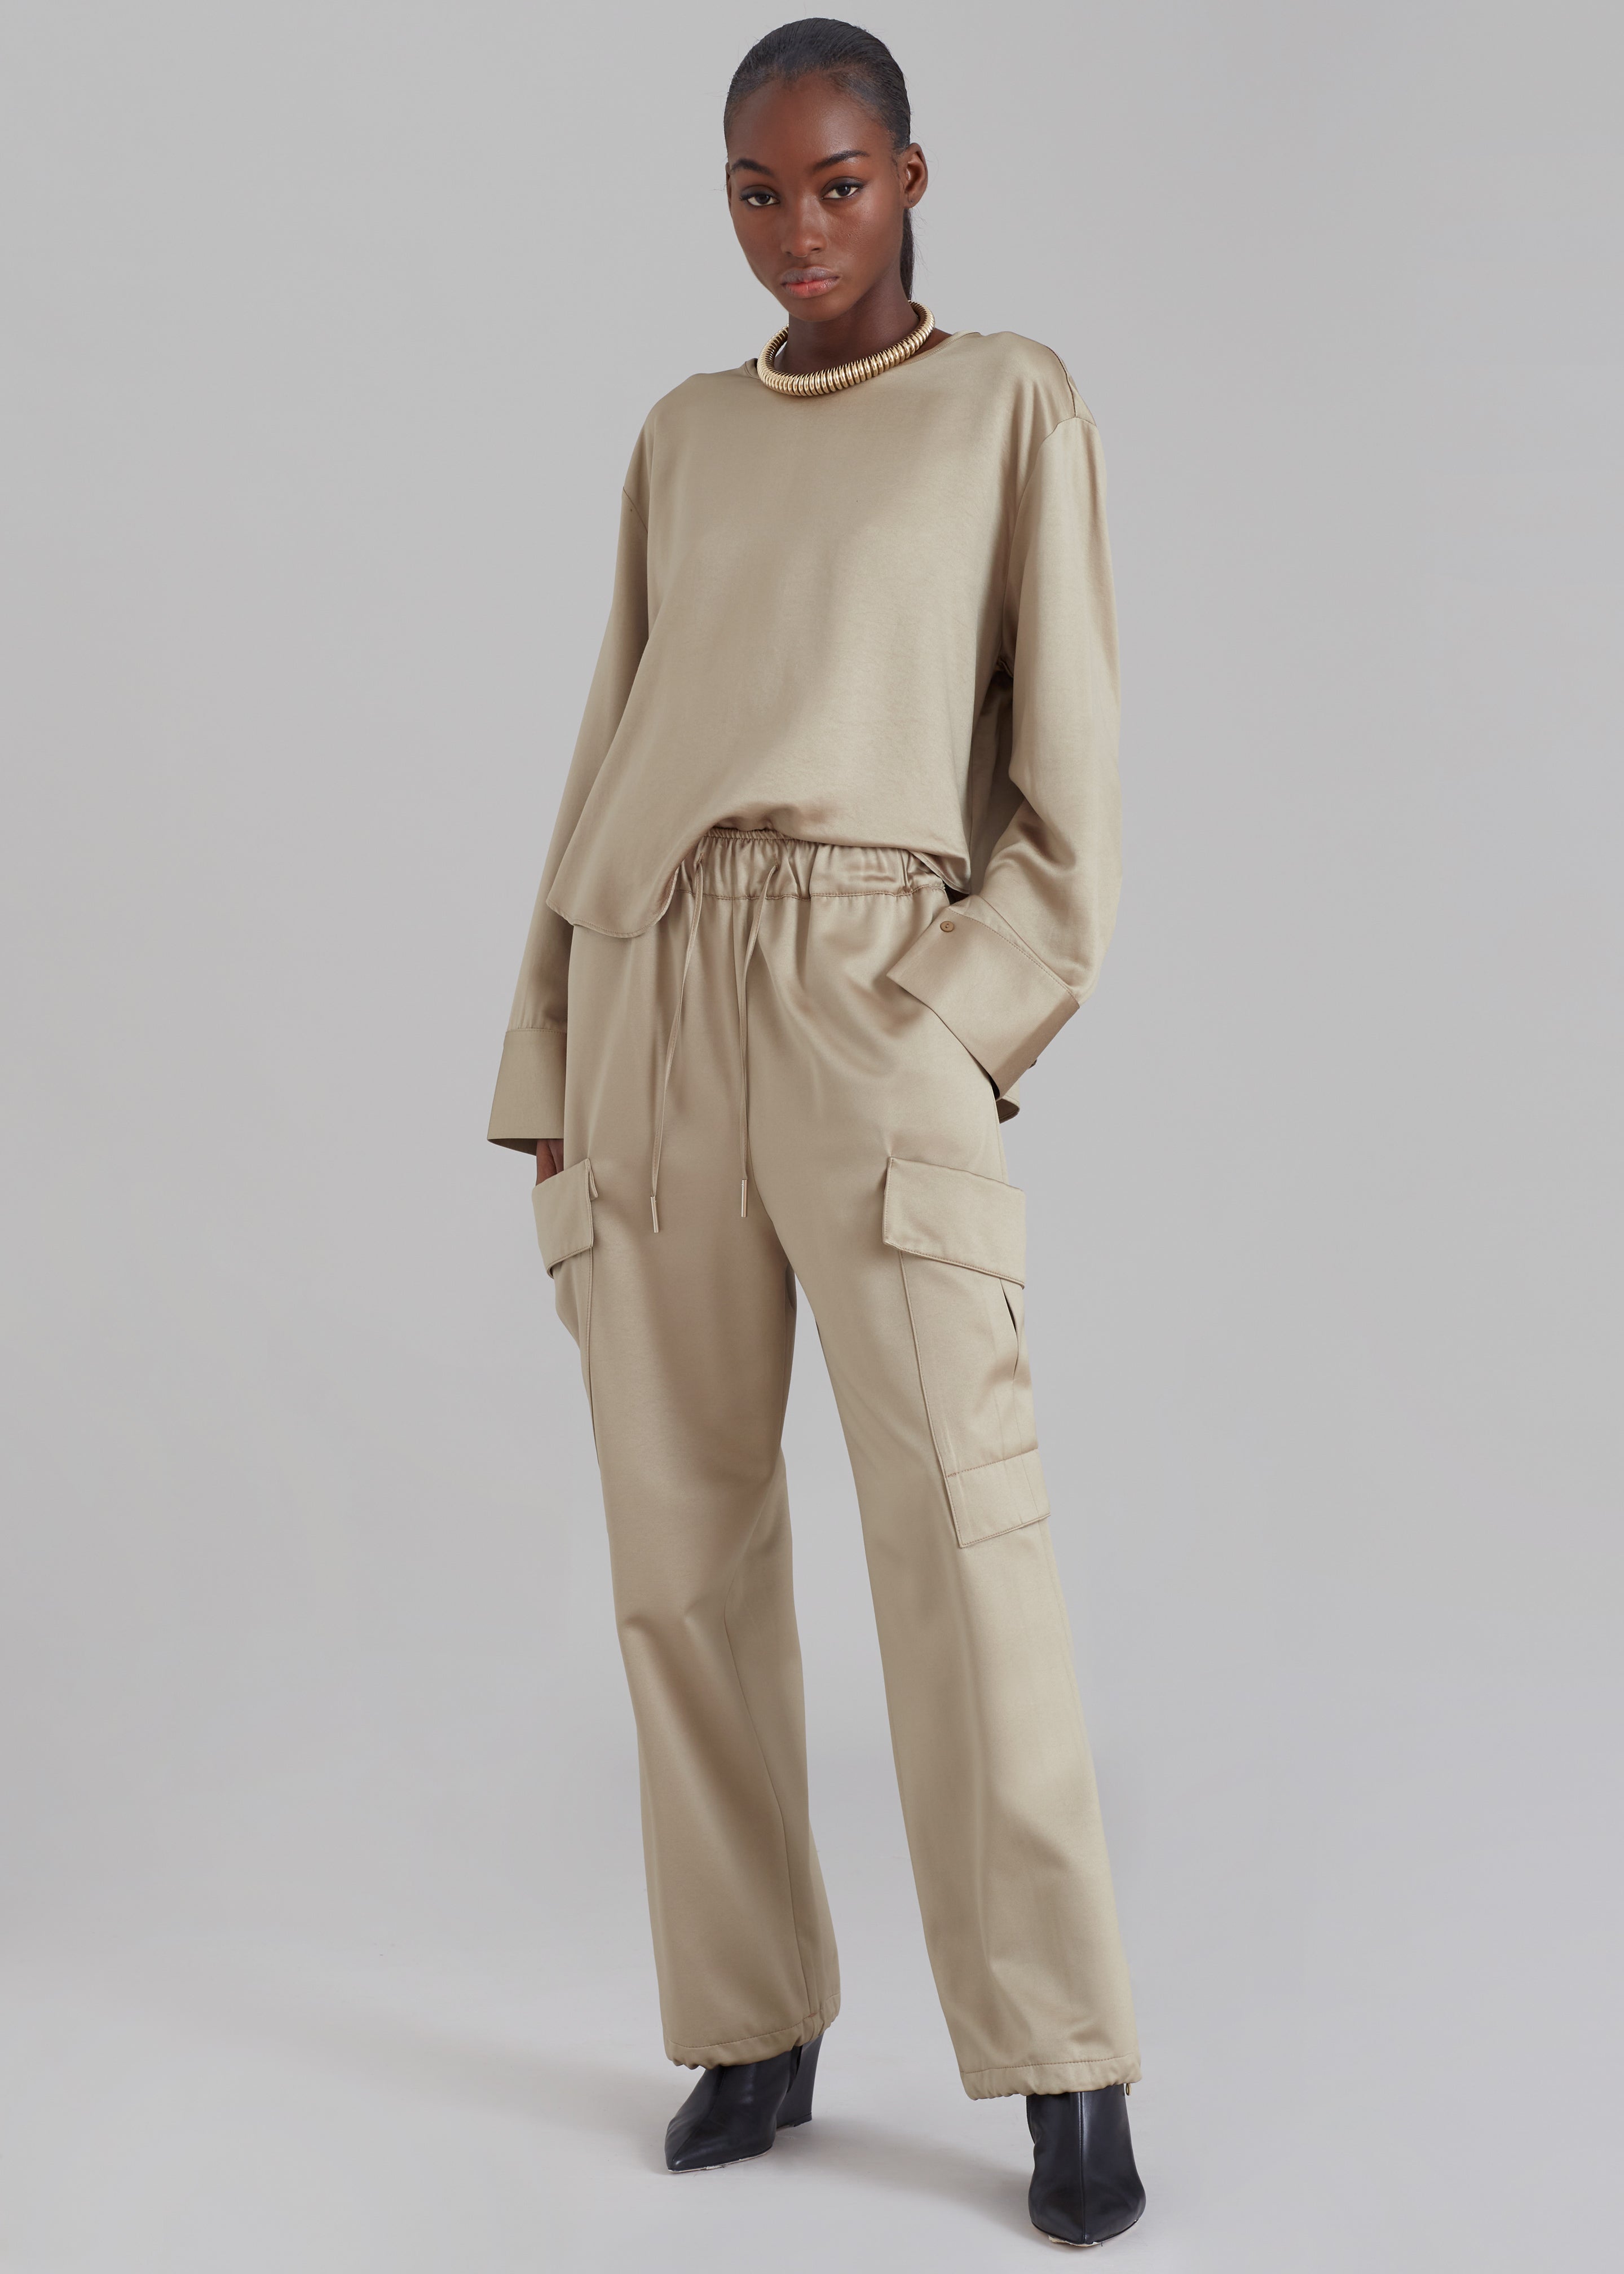 Frankie Shop Kemop silky cargo pants in bronze come in a midweight satin fabric and have an Oversized silhouette with a Straight leg and Elasticated waistband with drawstring. These cargo pants have Enlarged cargo pockets at each leg and Side seam hip pockets. The trousers have adjustable toggles at the hem